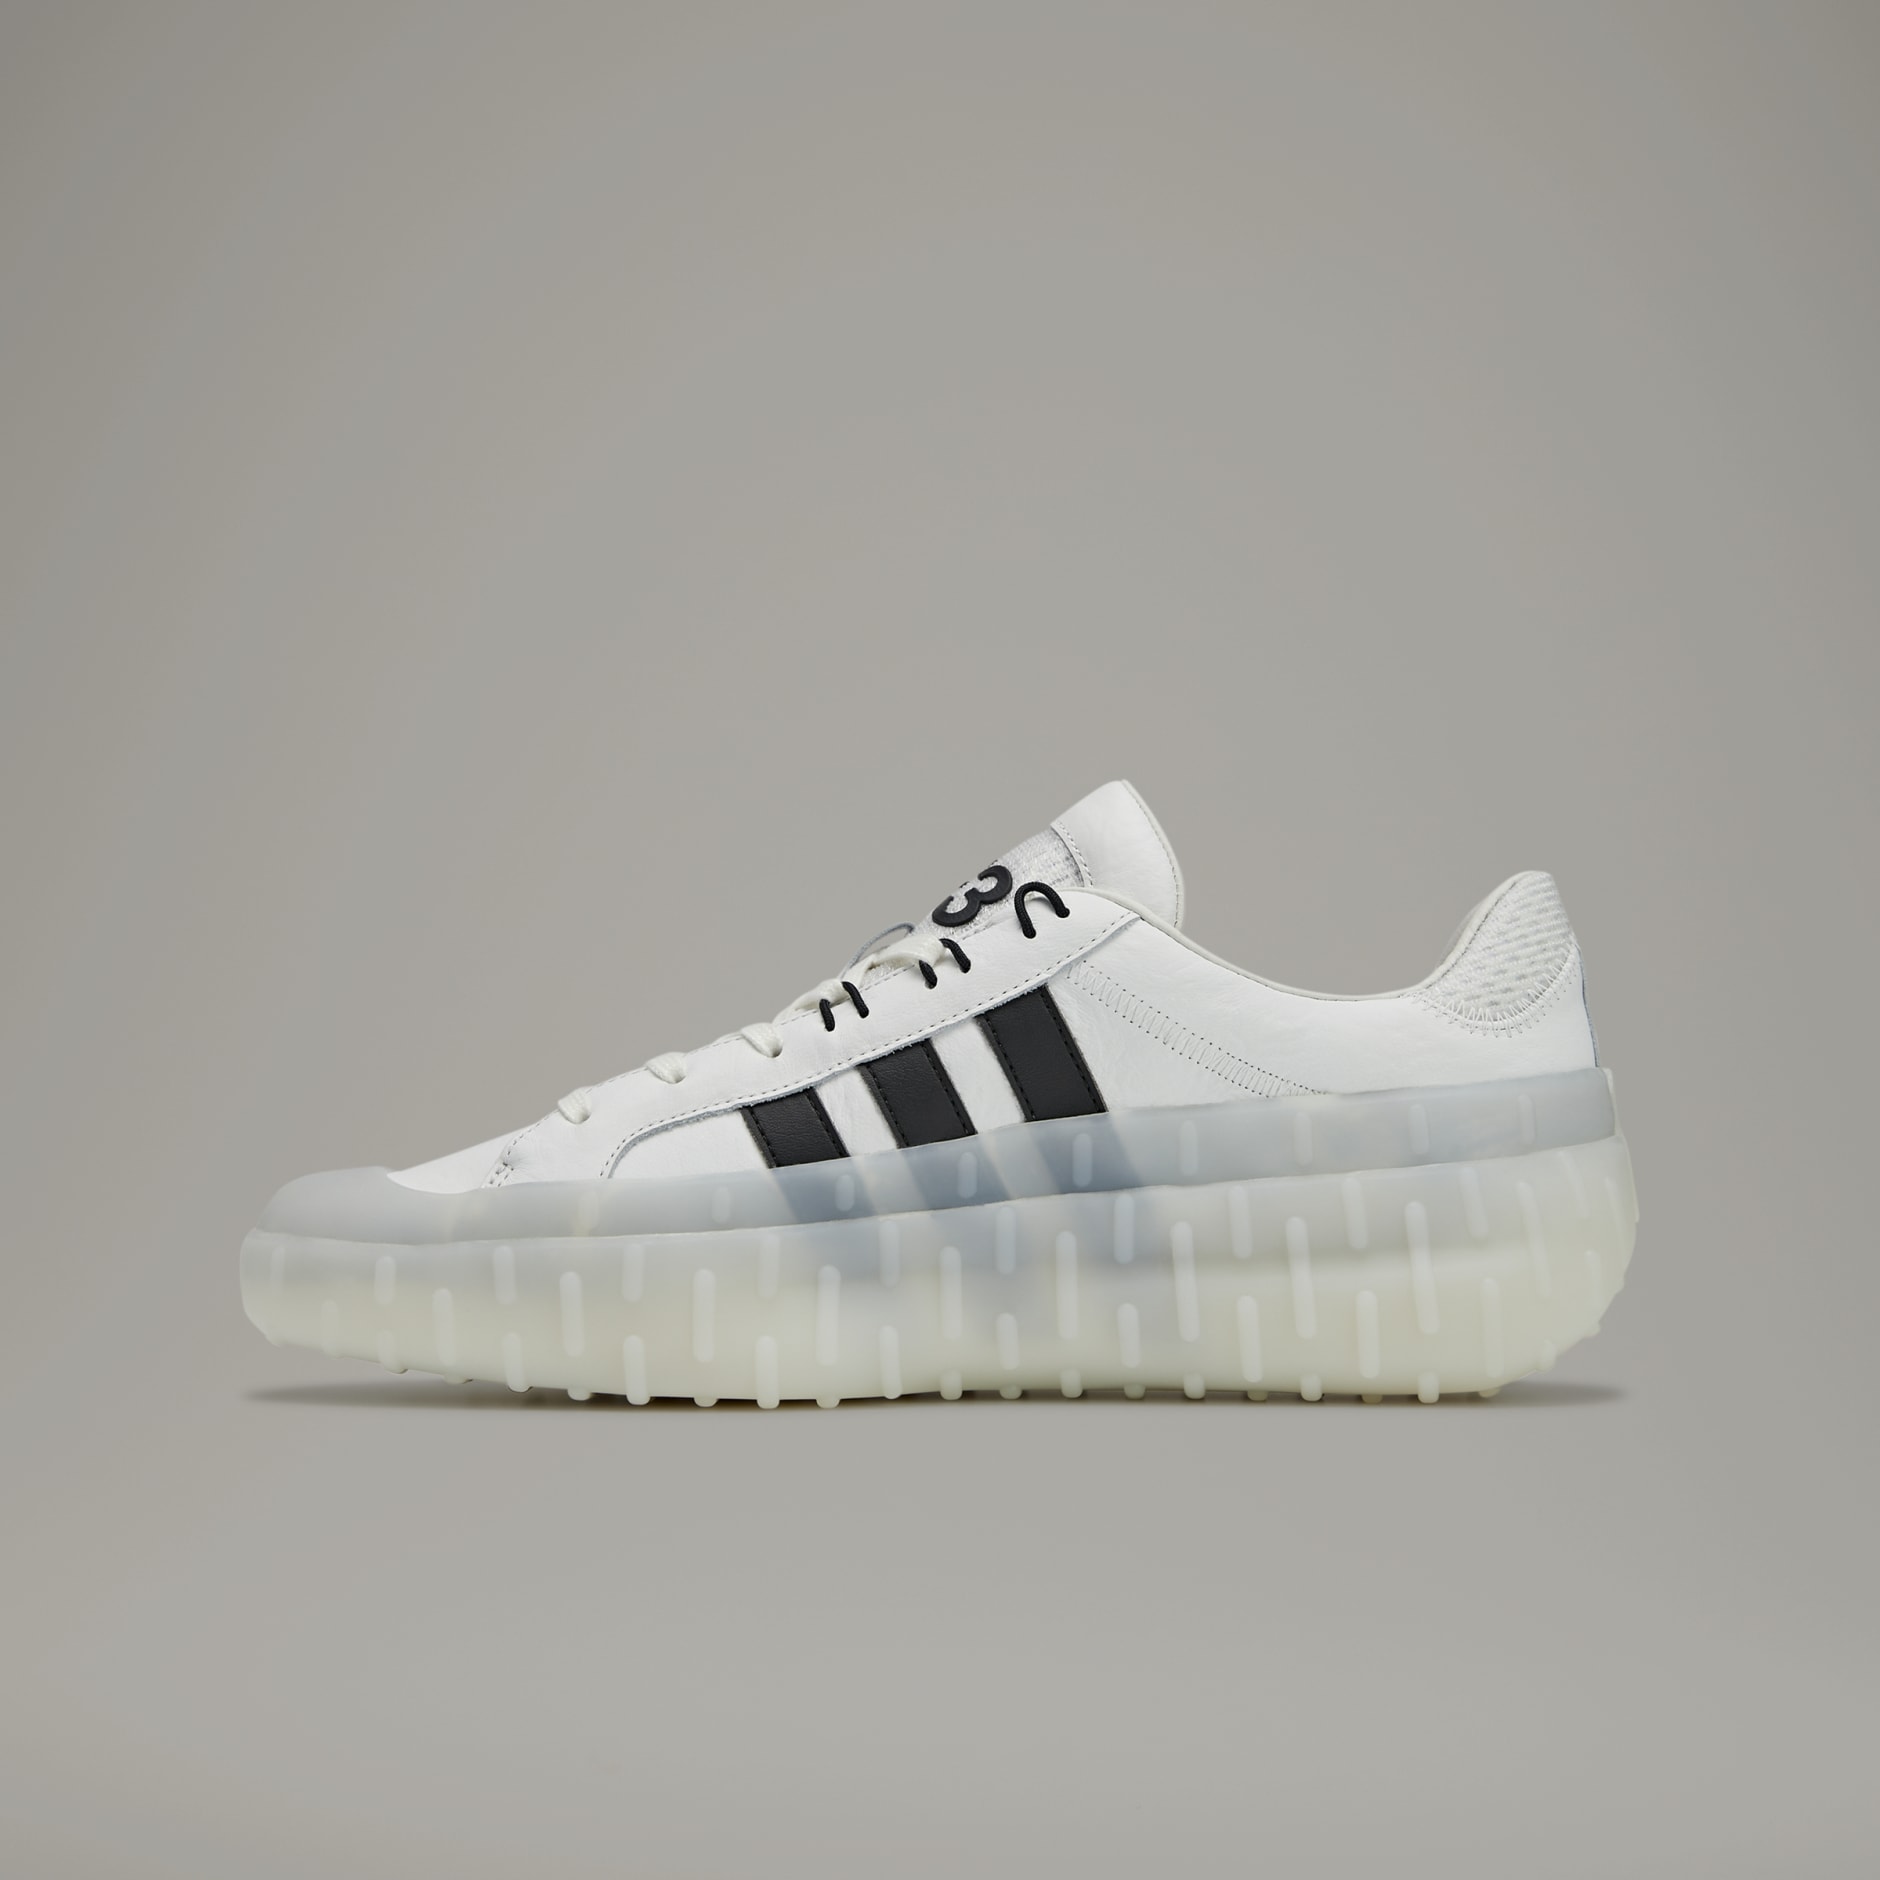 mager Janice protein adidas Y-3 GR.1P Shoes - White | adidas BH